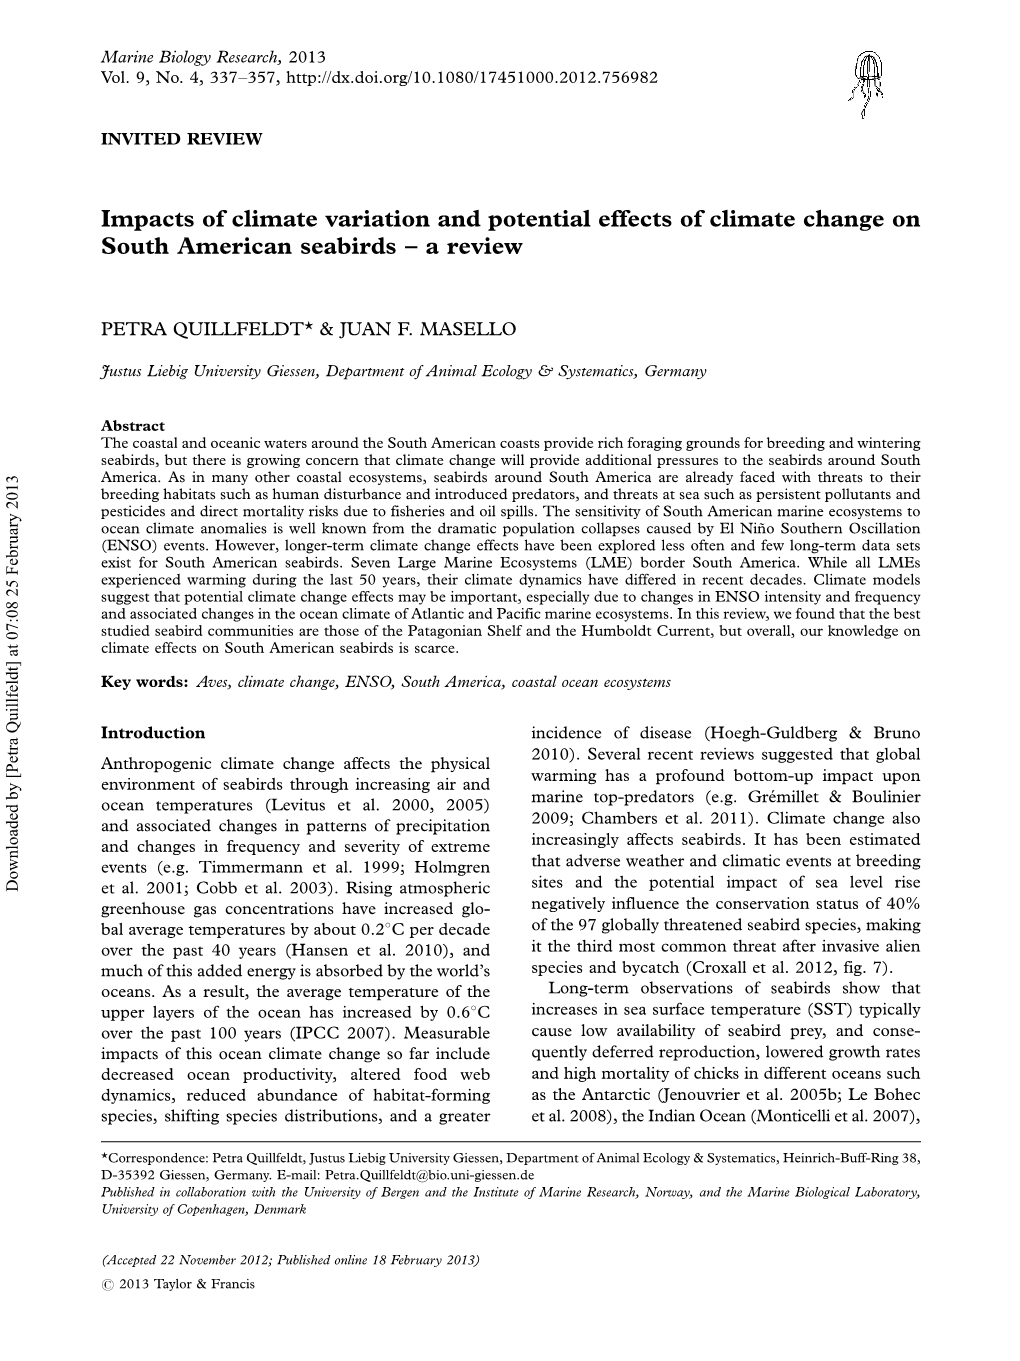 Impacts of Climate Variation and Potential Effects of Climate Change on South American Seabirds Á a Review